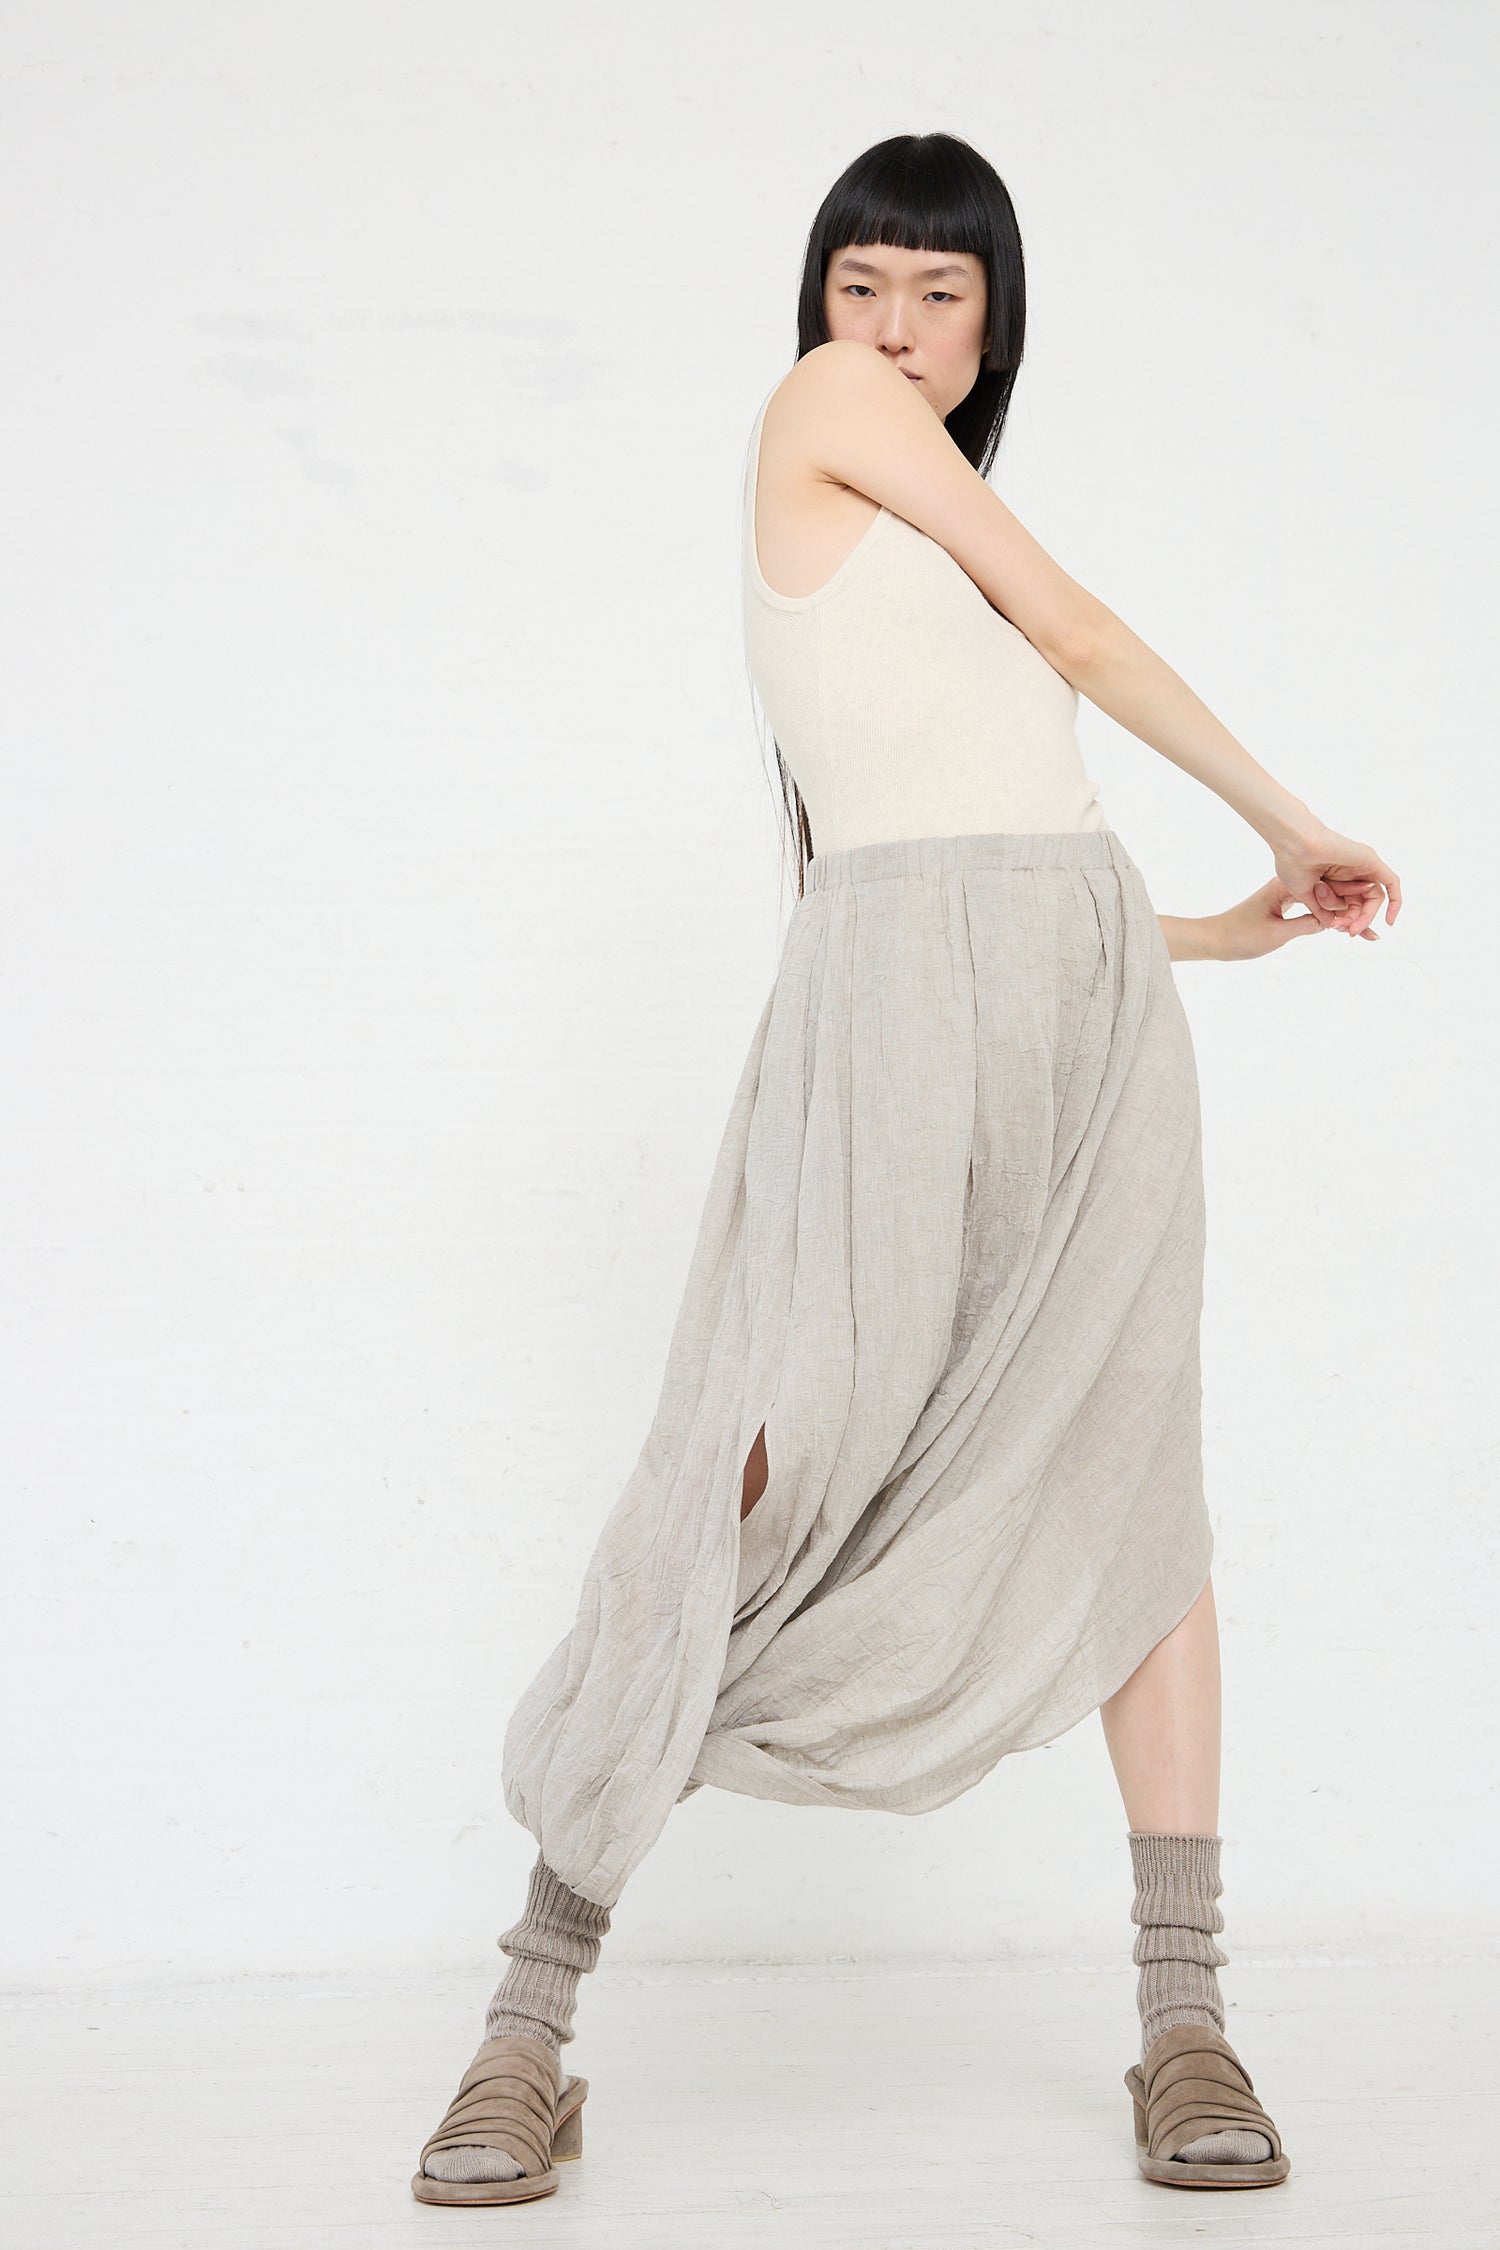 A woman with black hair in a beige cotton/linen blend tank top and draped grey pants poses gracefully against a white background wearing the Gauze Twist Skirt in Ash by Lauren Manoogian.